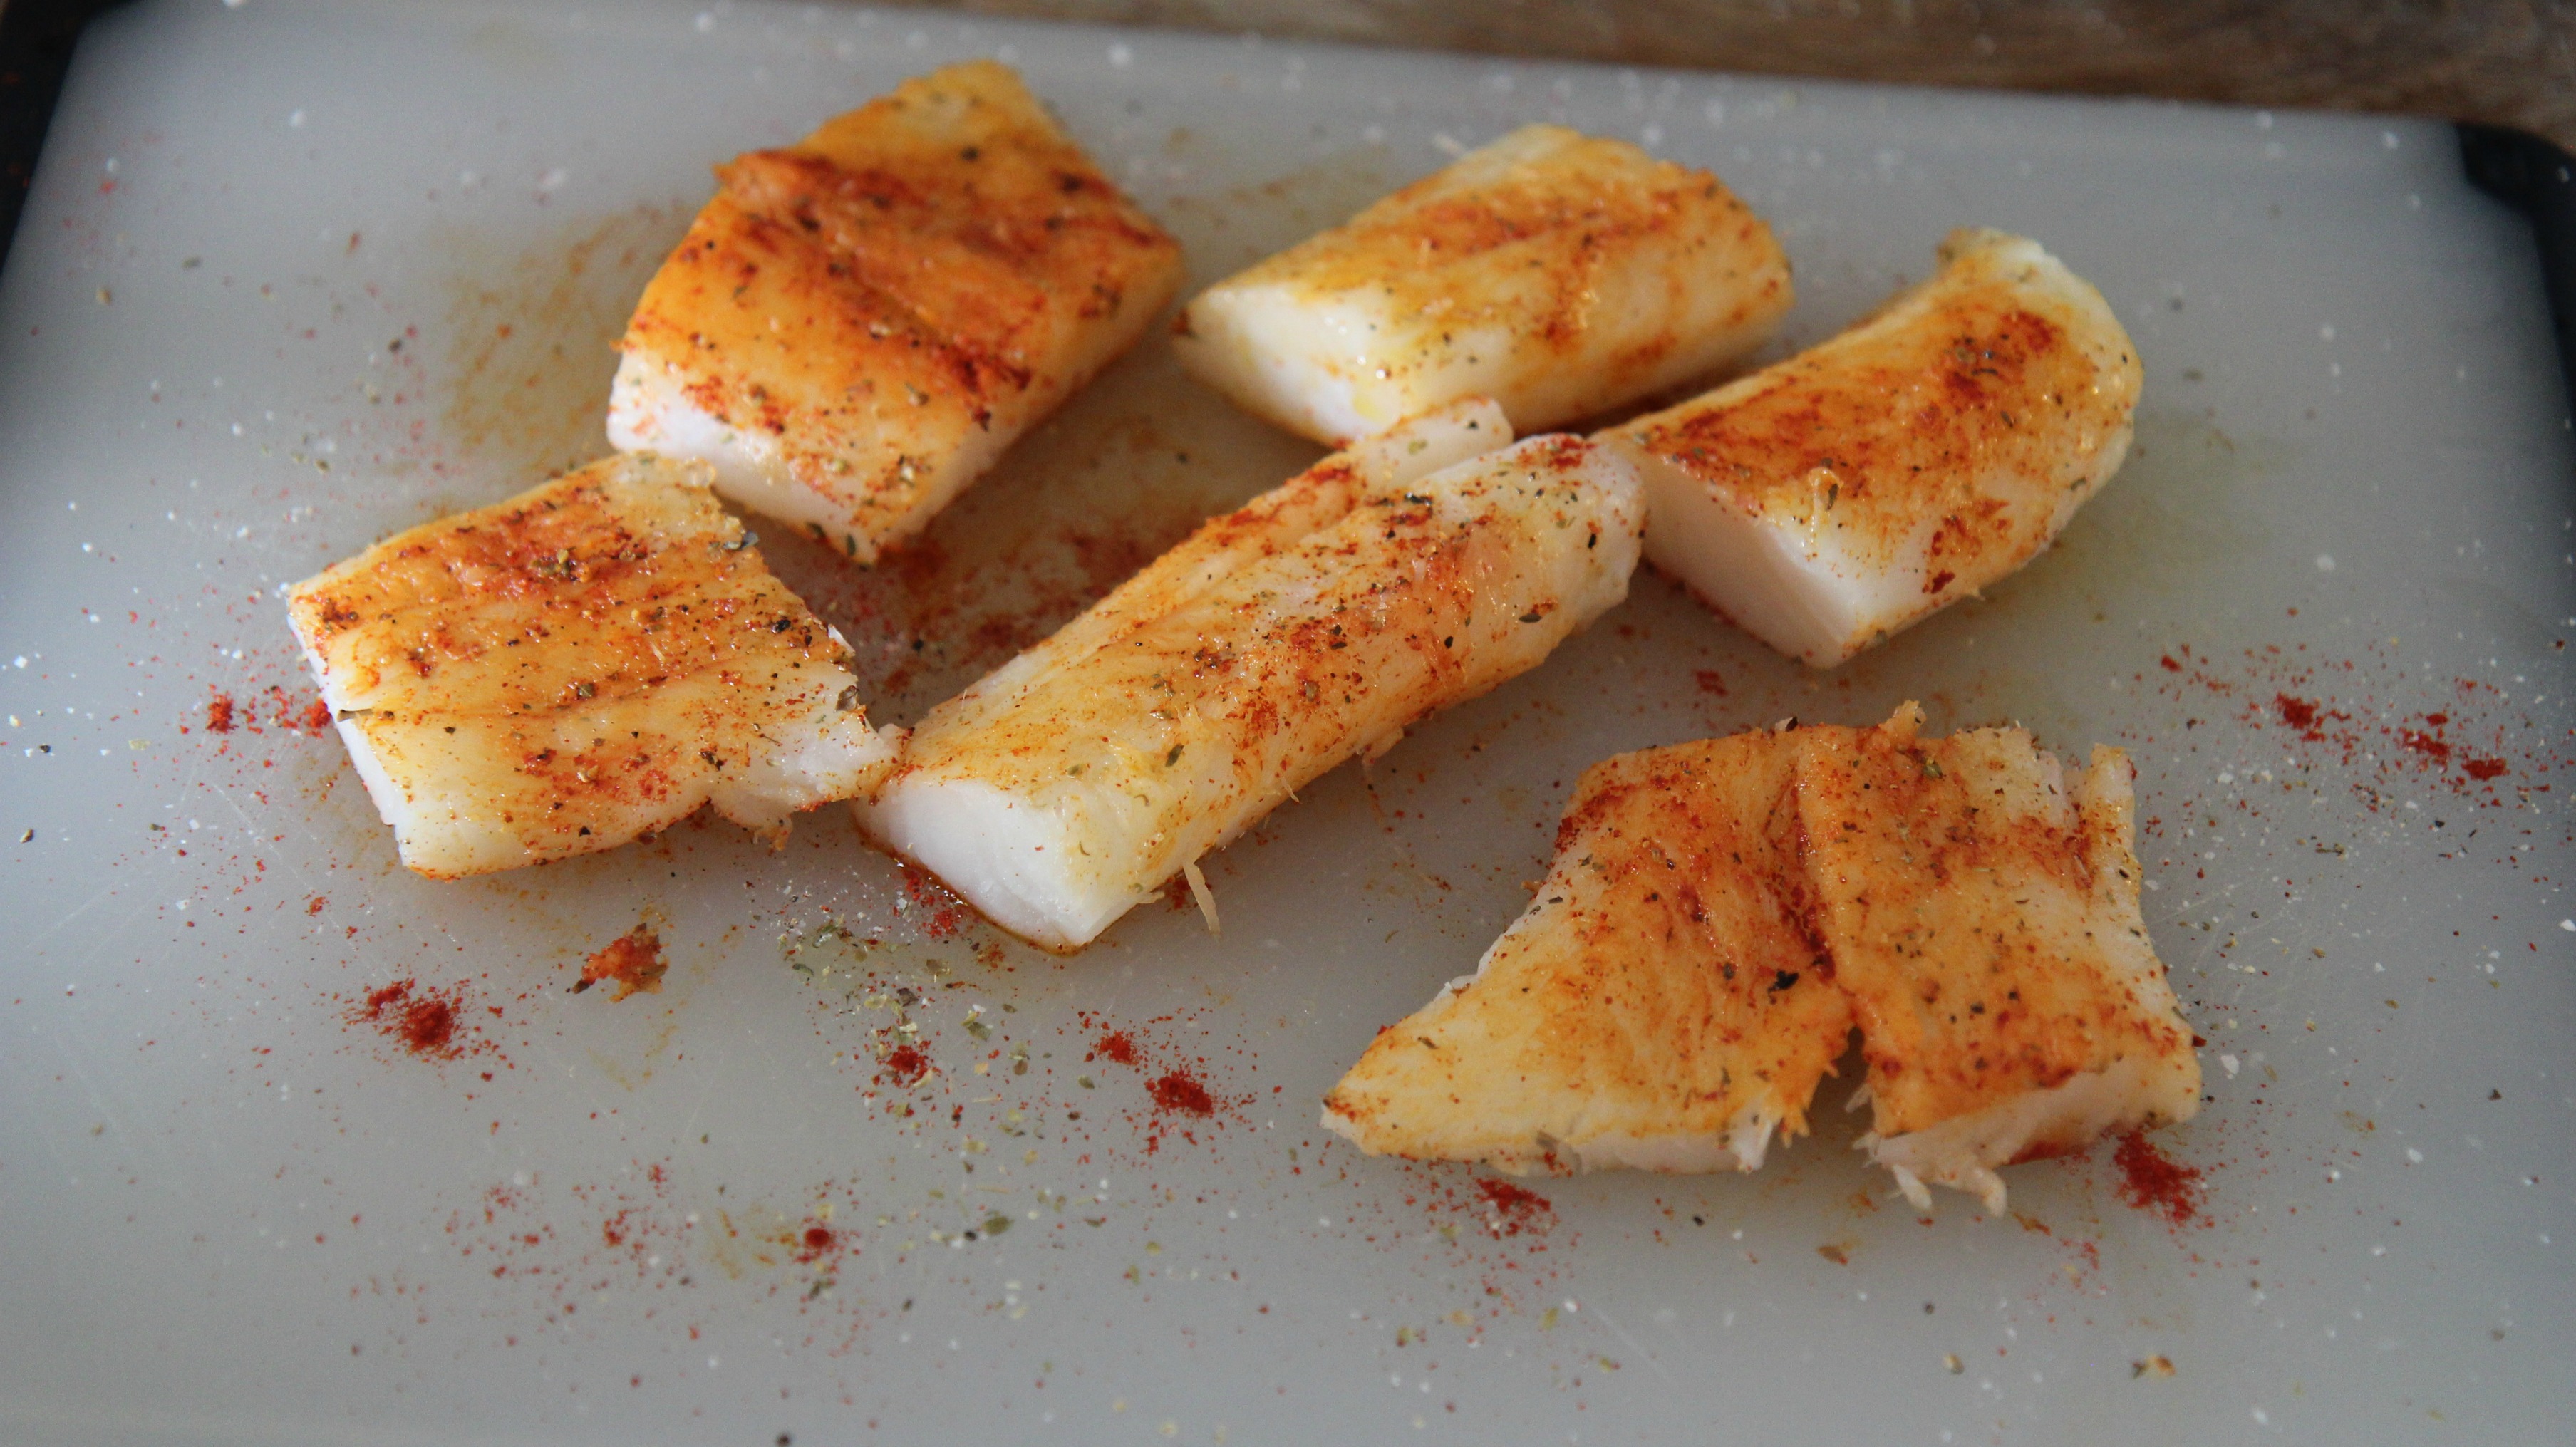 For this skillet cod dinner, you want to season your fish before cooking. Use a blend of spices you love, like chili powder for a little spice. 